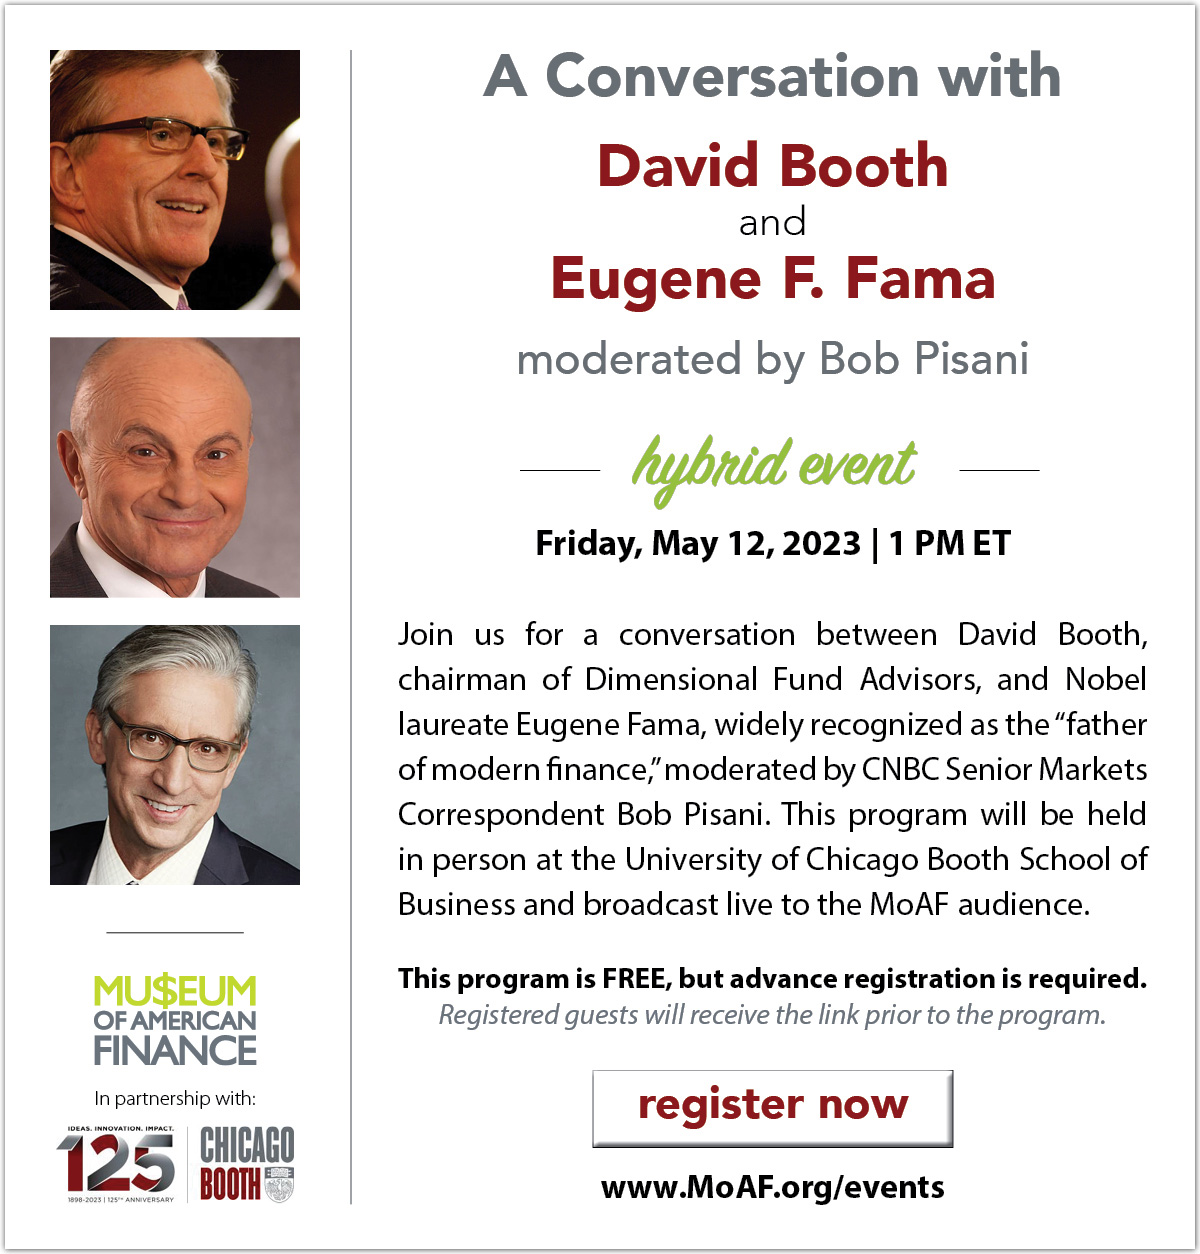 A Conversation with David Booth and Eugene Fama